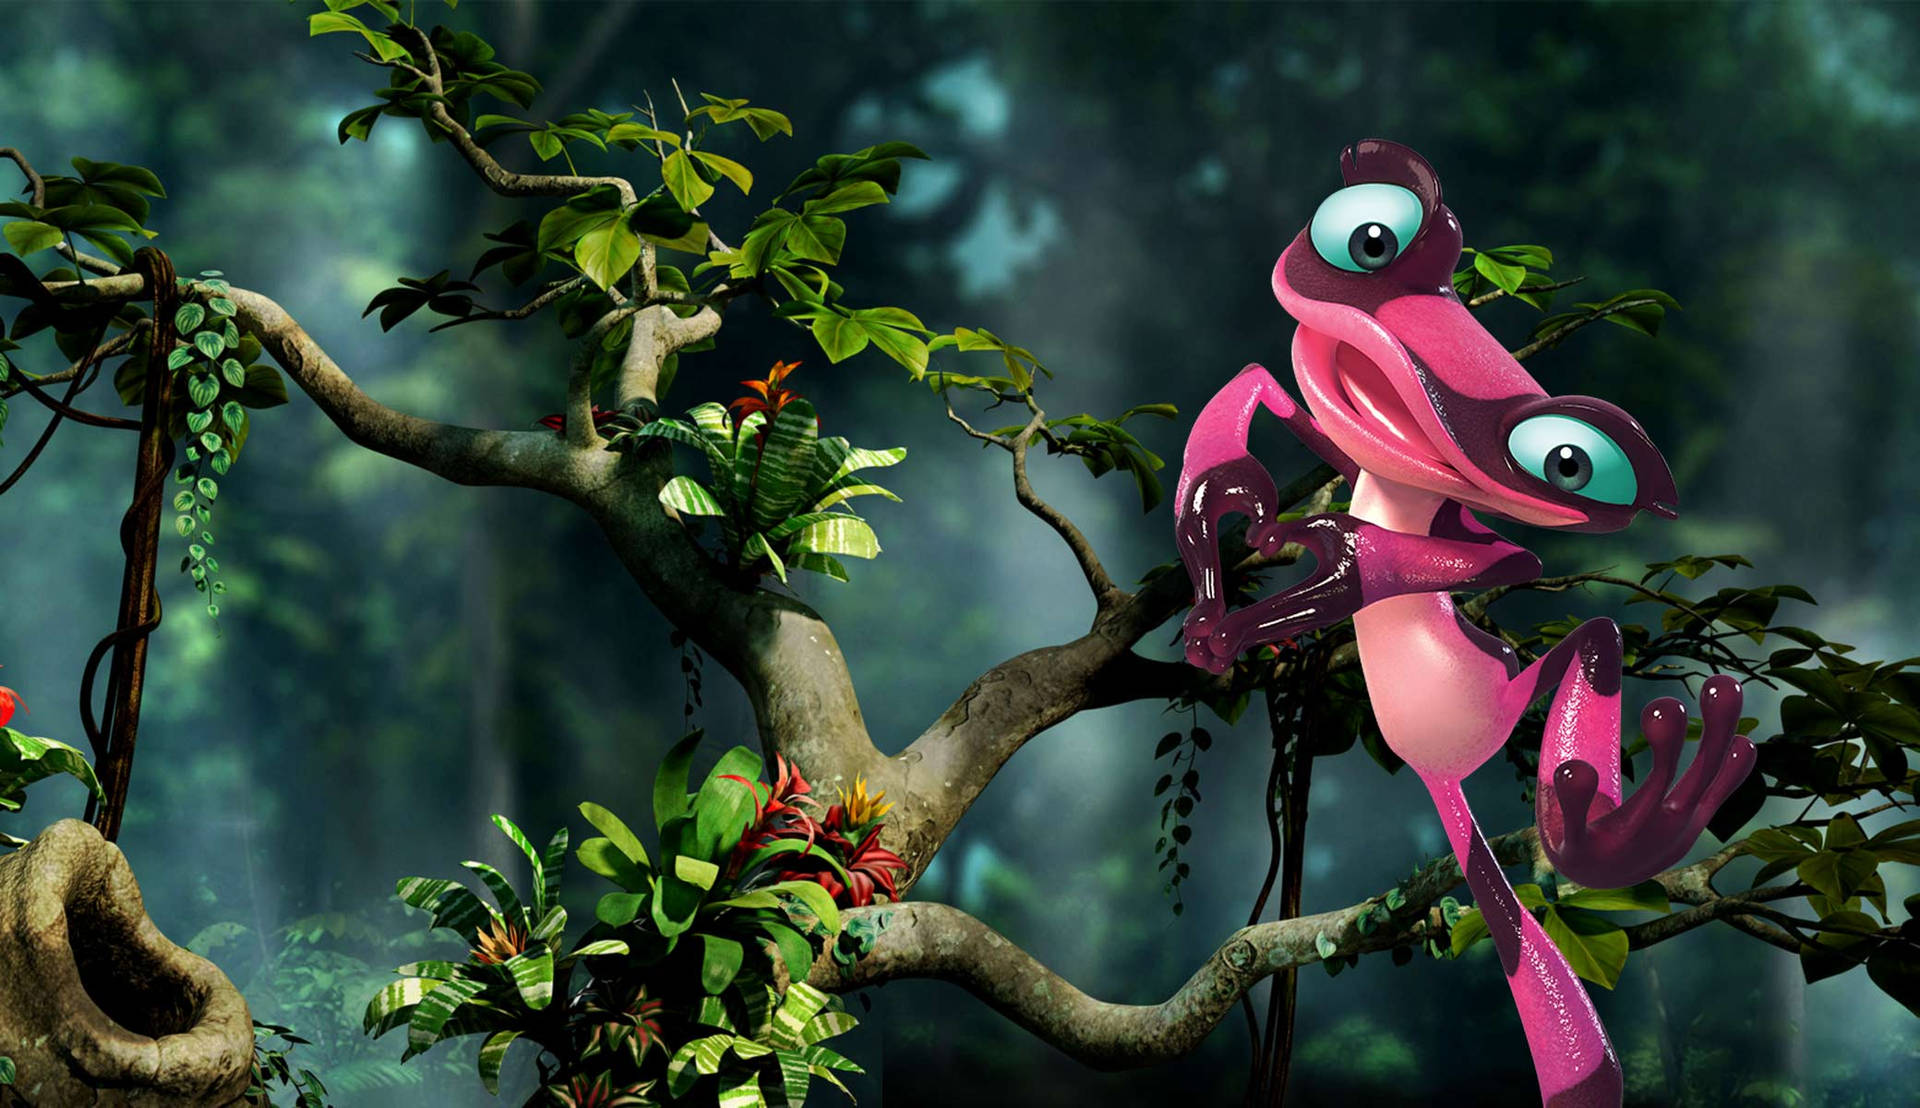 Free Rio 2 Wallpaper Downloads, [100+] Rio 2 Wallpapers for FREE |  